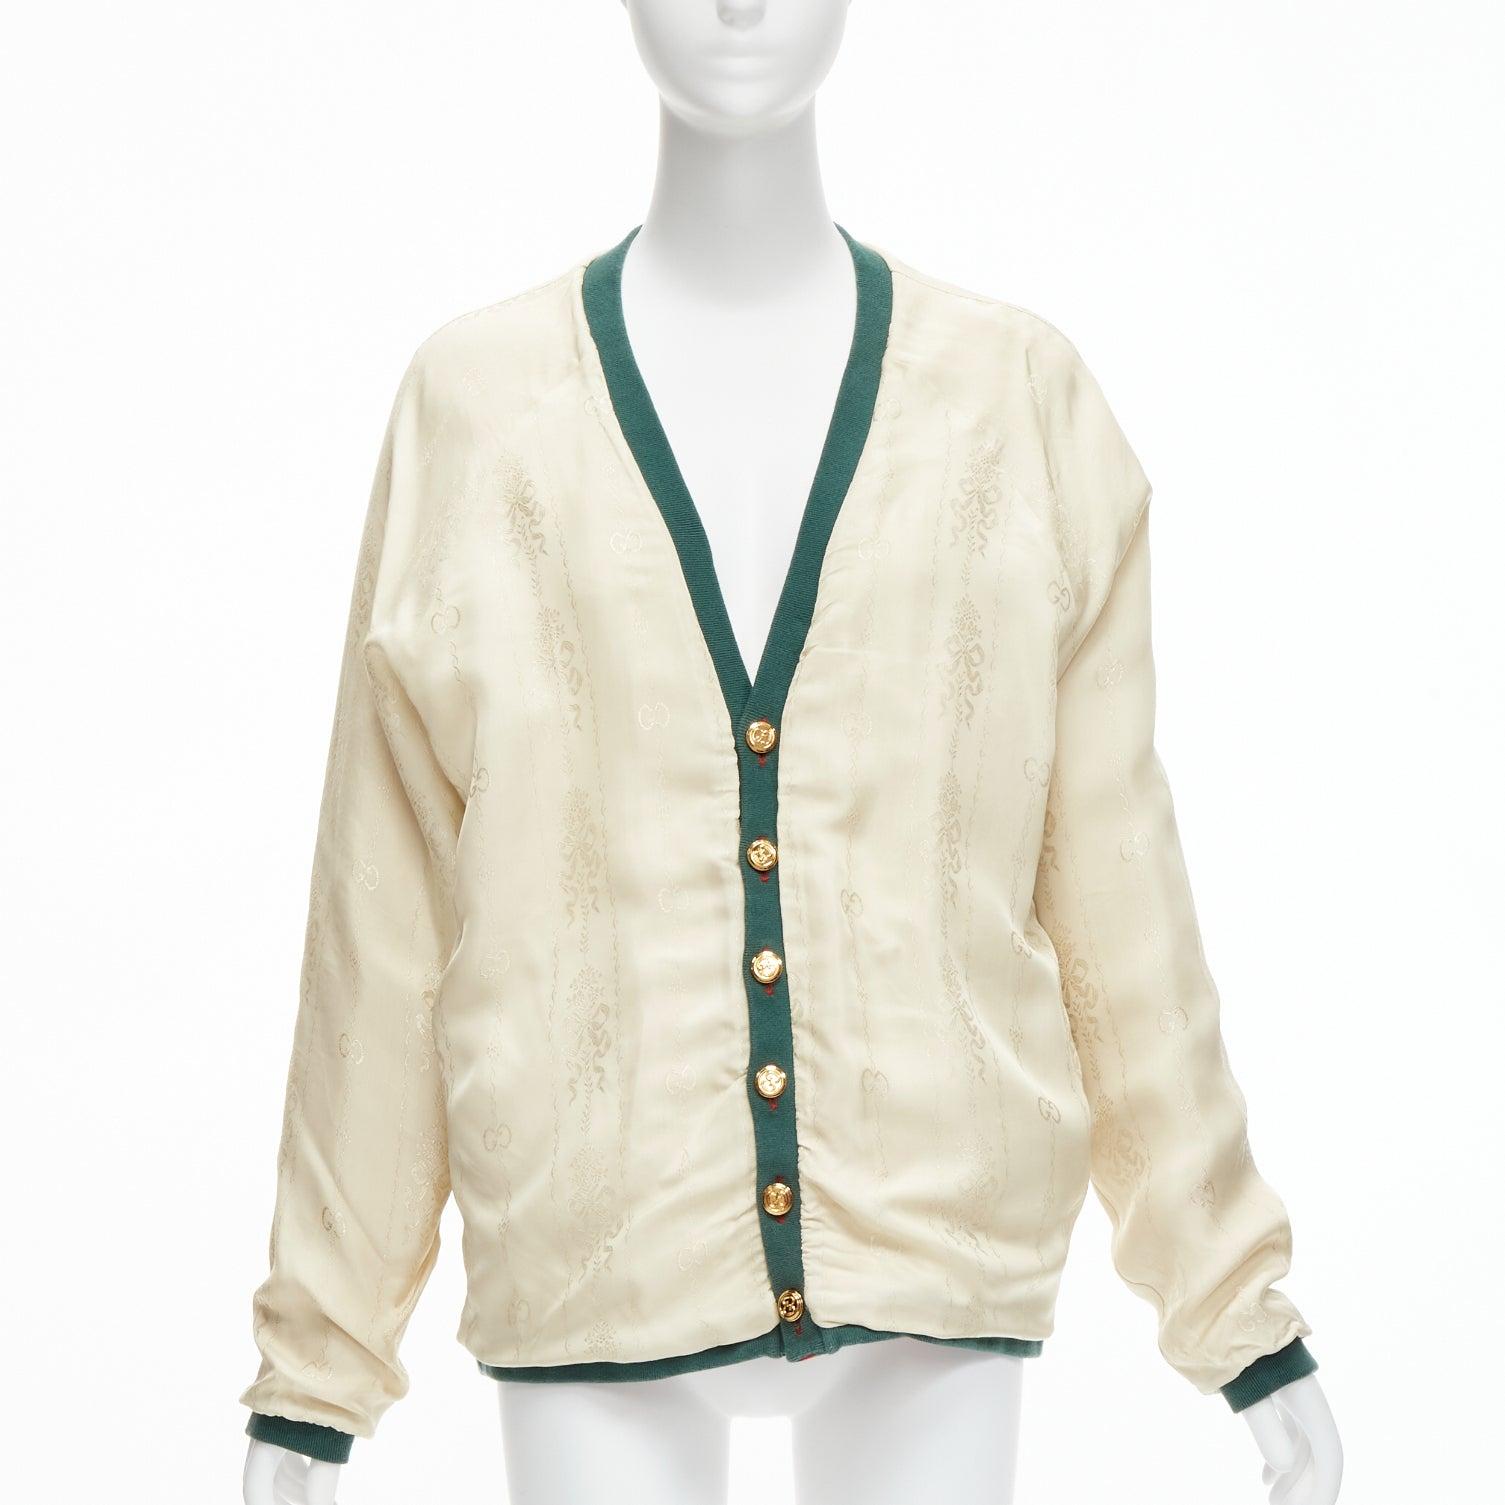 GUCCI Reversible green red web gold GG button oversized cardigan S
Reference: TGAS/D00534
Brand: Gucci
Designer: Alessandro Michele
Material: Cotton, Viscose
Color: Cream, Multicolour
Pattern: Monogram
Closure: Button
Lining: Cream Fabric
Extra